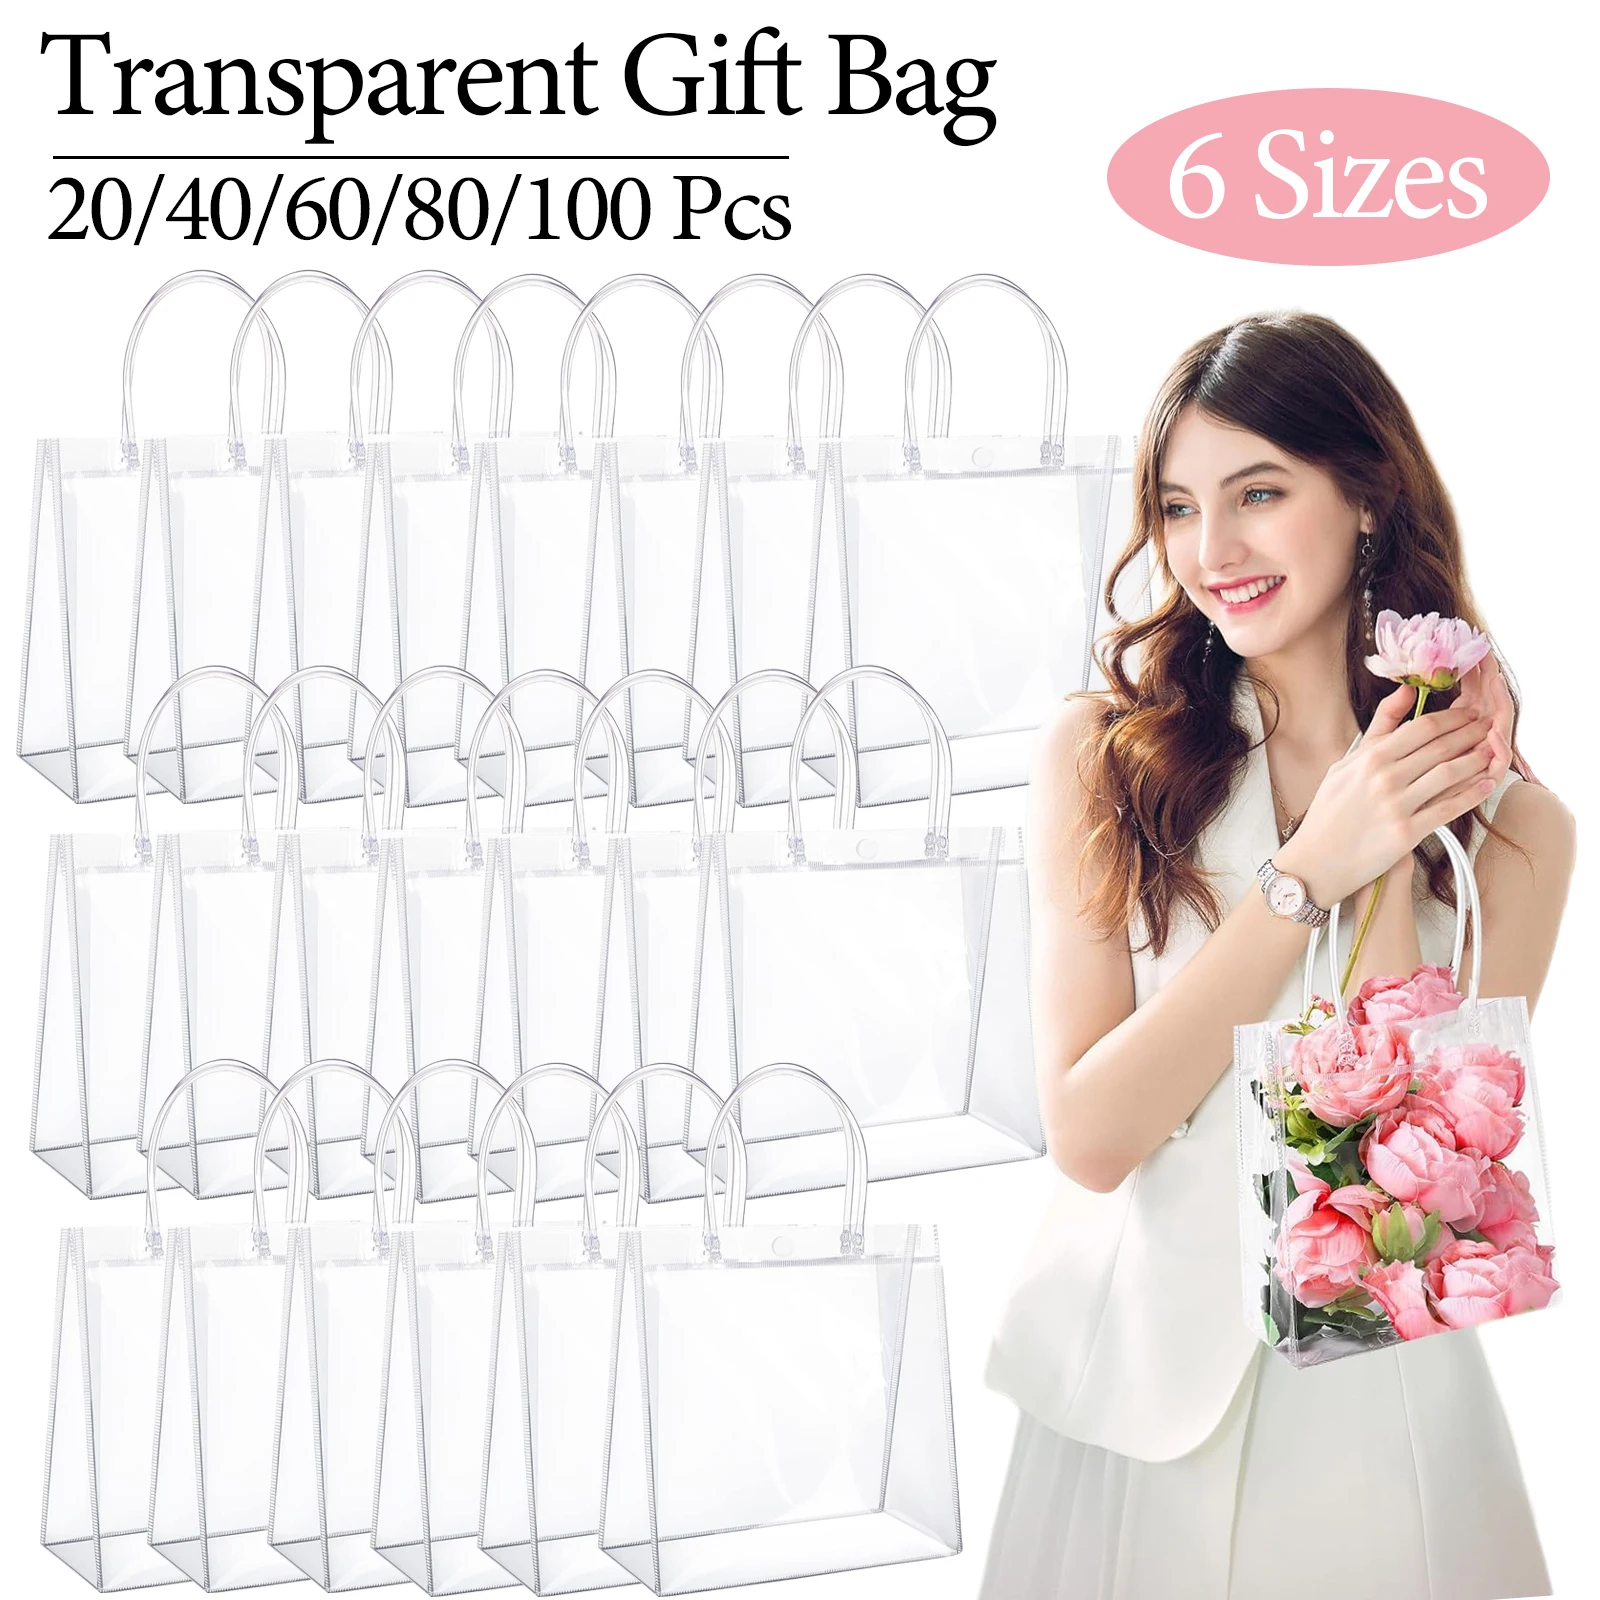 20-100-Pcs-Clear-Plastic-Gift-Bags-with-Handle-Transparent-Gift-Bag ...